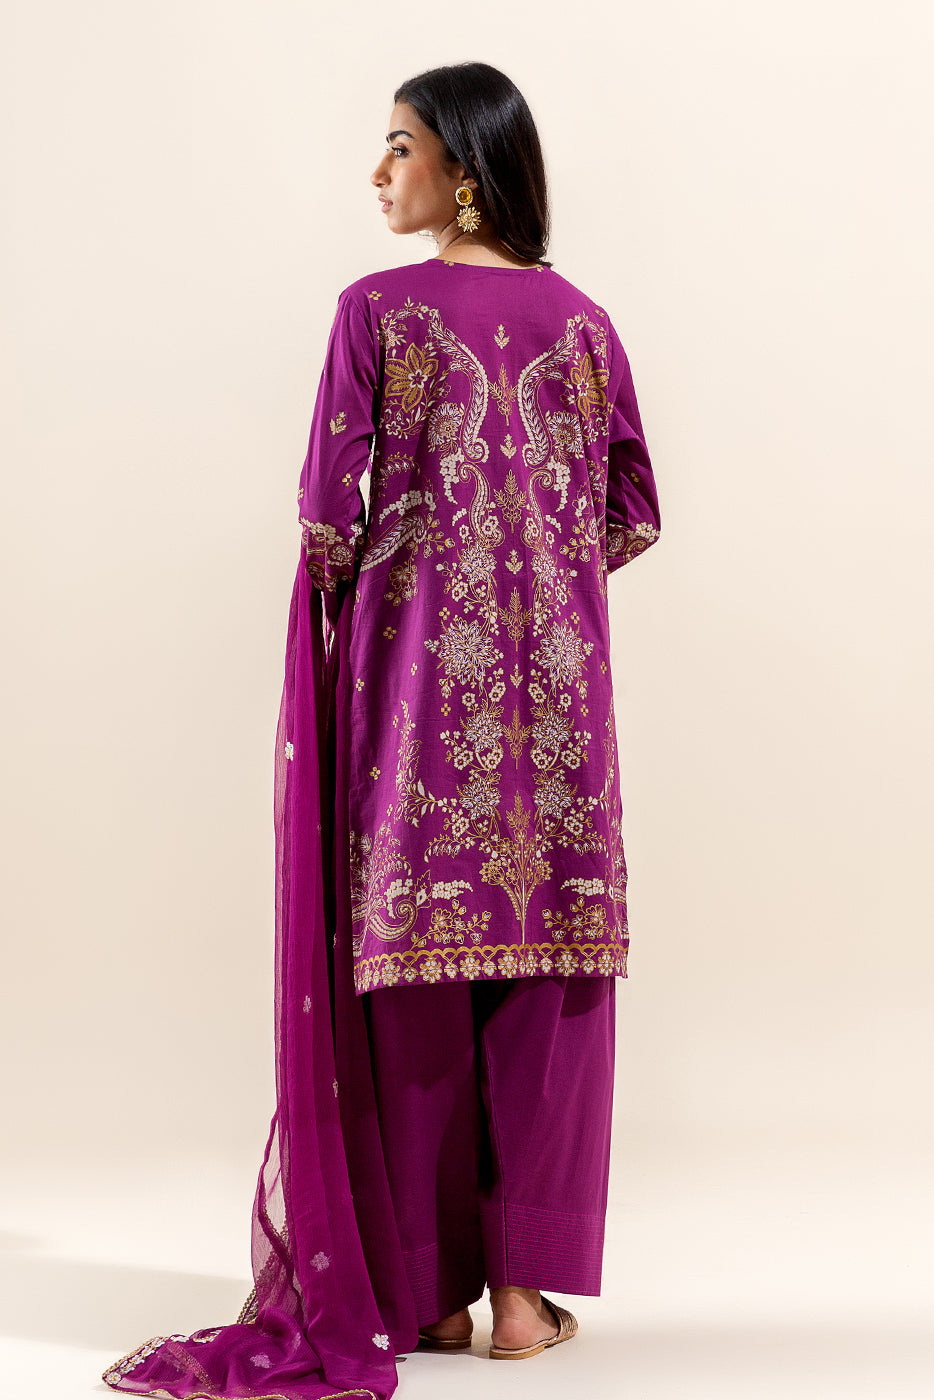 3 PIECE EMBROIDERED LAWN SUIT-MAGENTA DREAM (UNSTITCHED)